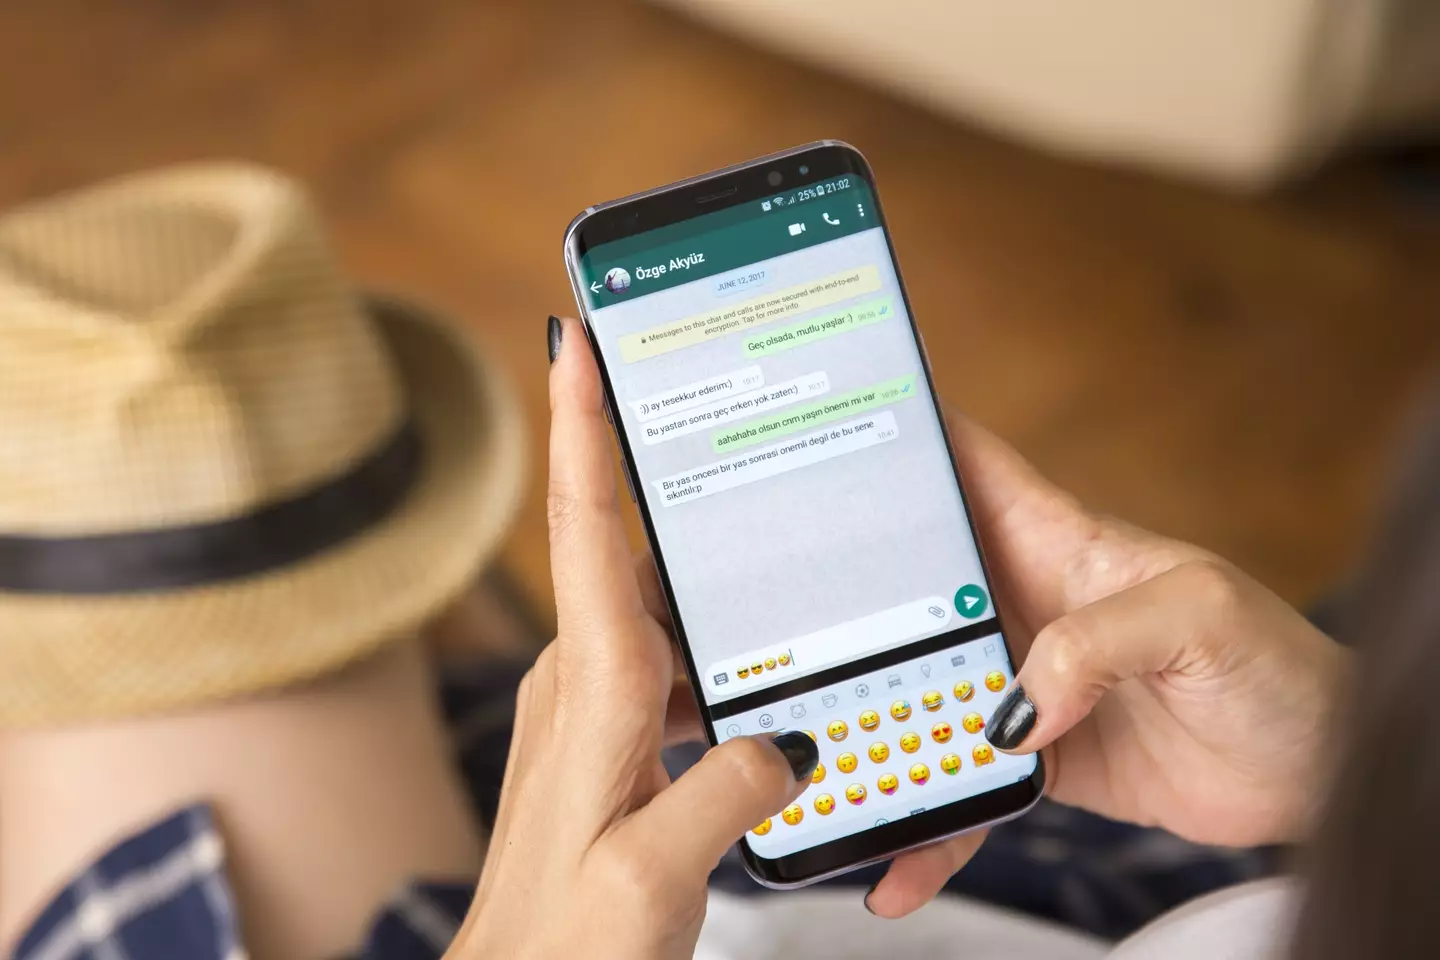 WhatsApp says the 'friend in need' scam is on the rise (